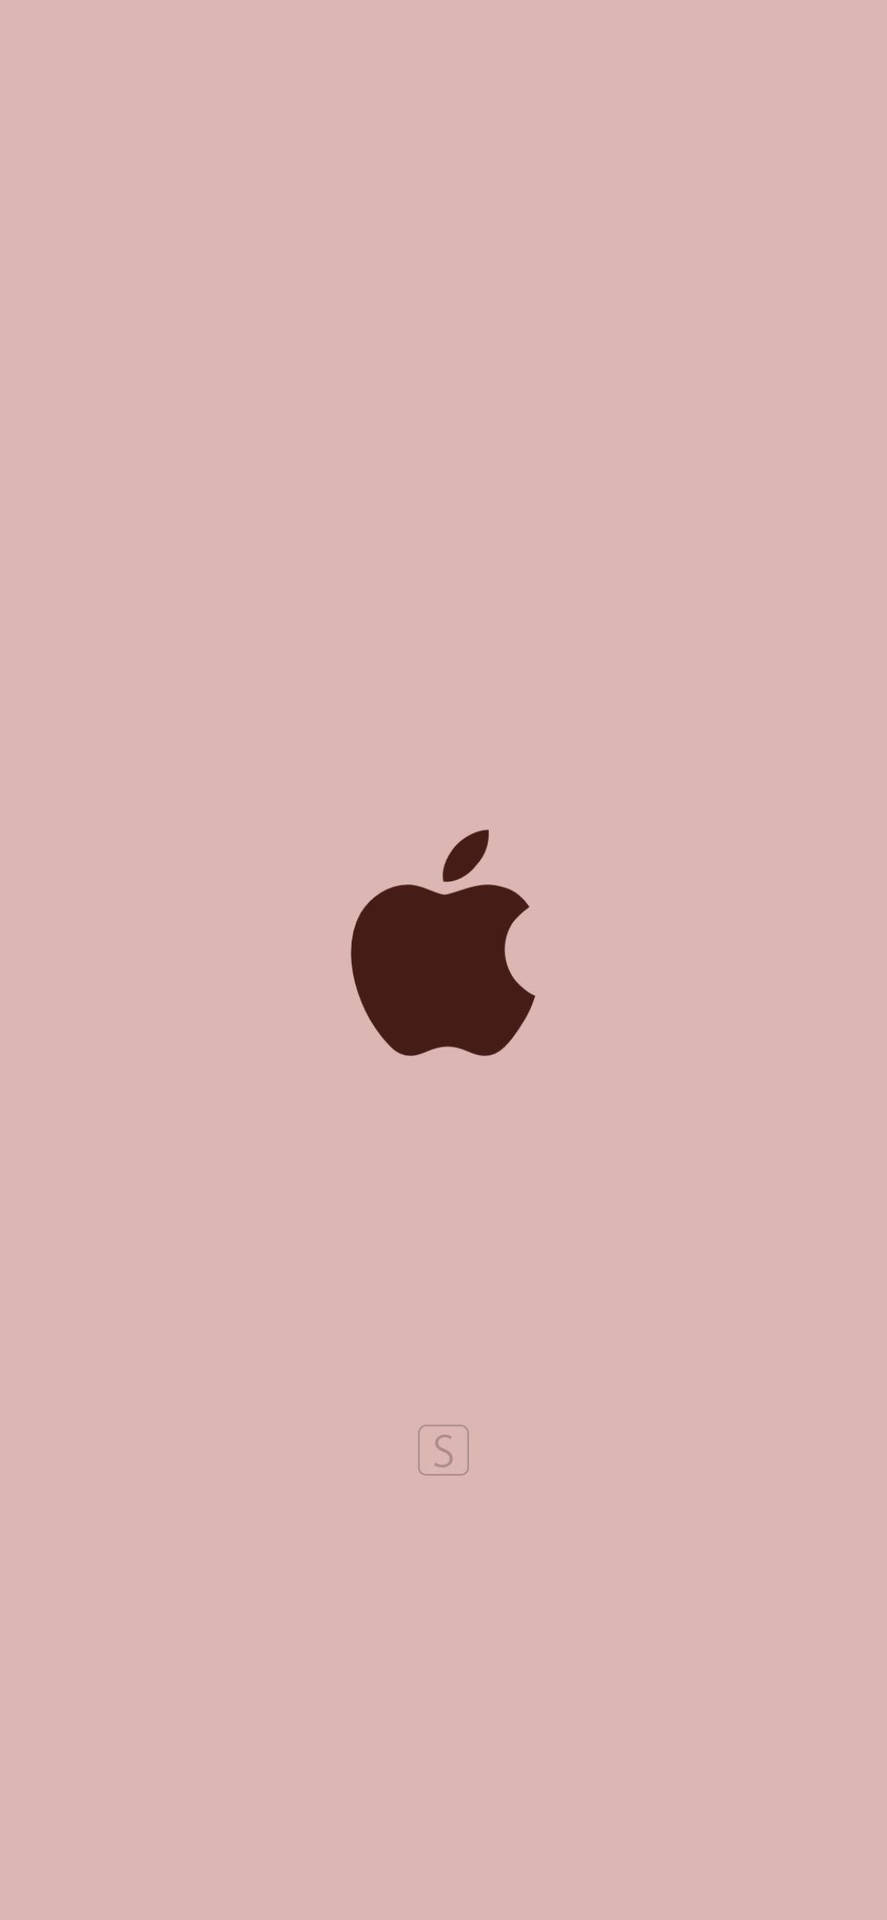 Rose Gold Ipad Apple Logo And S